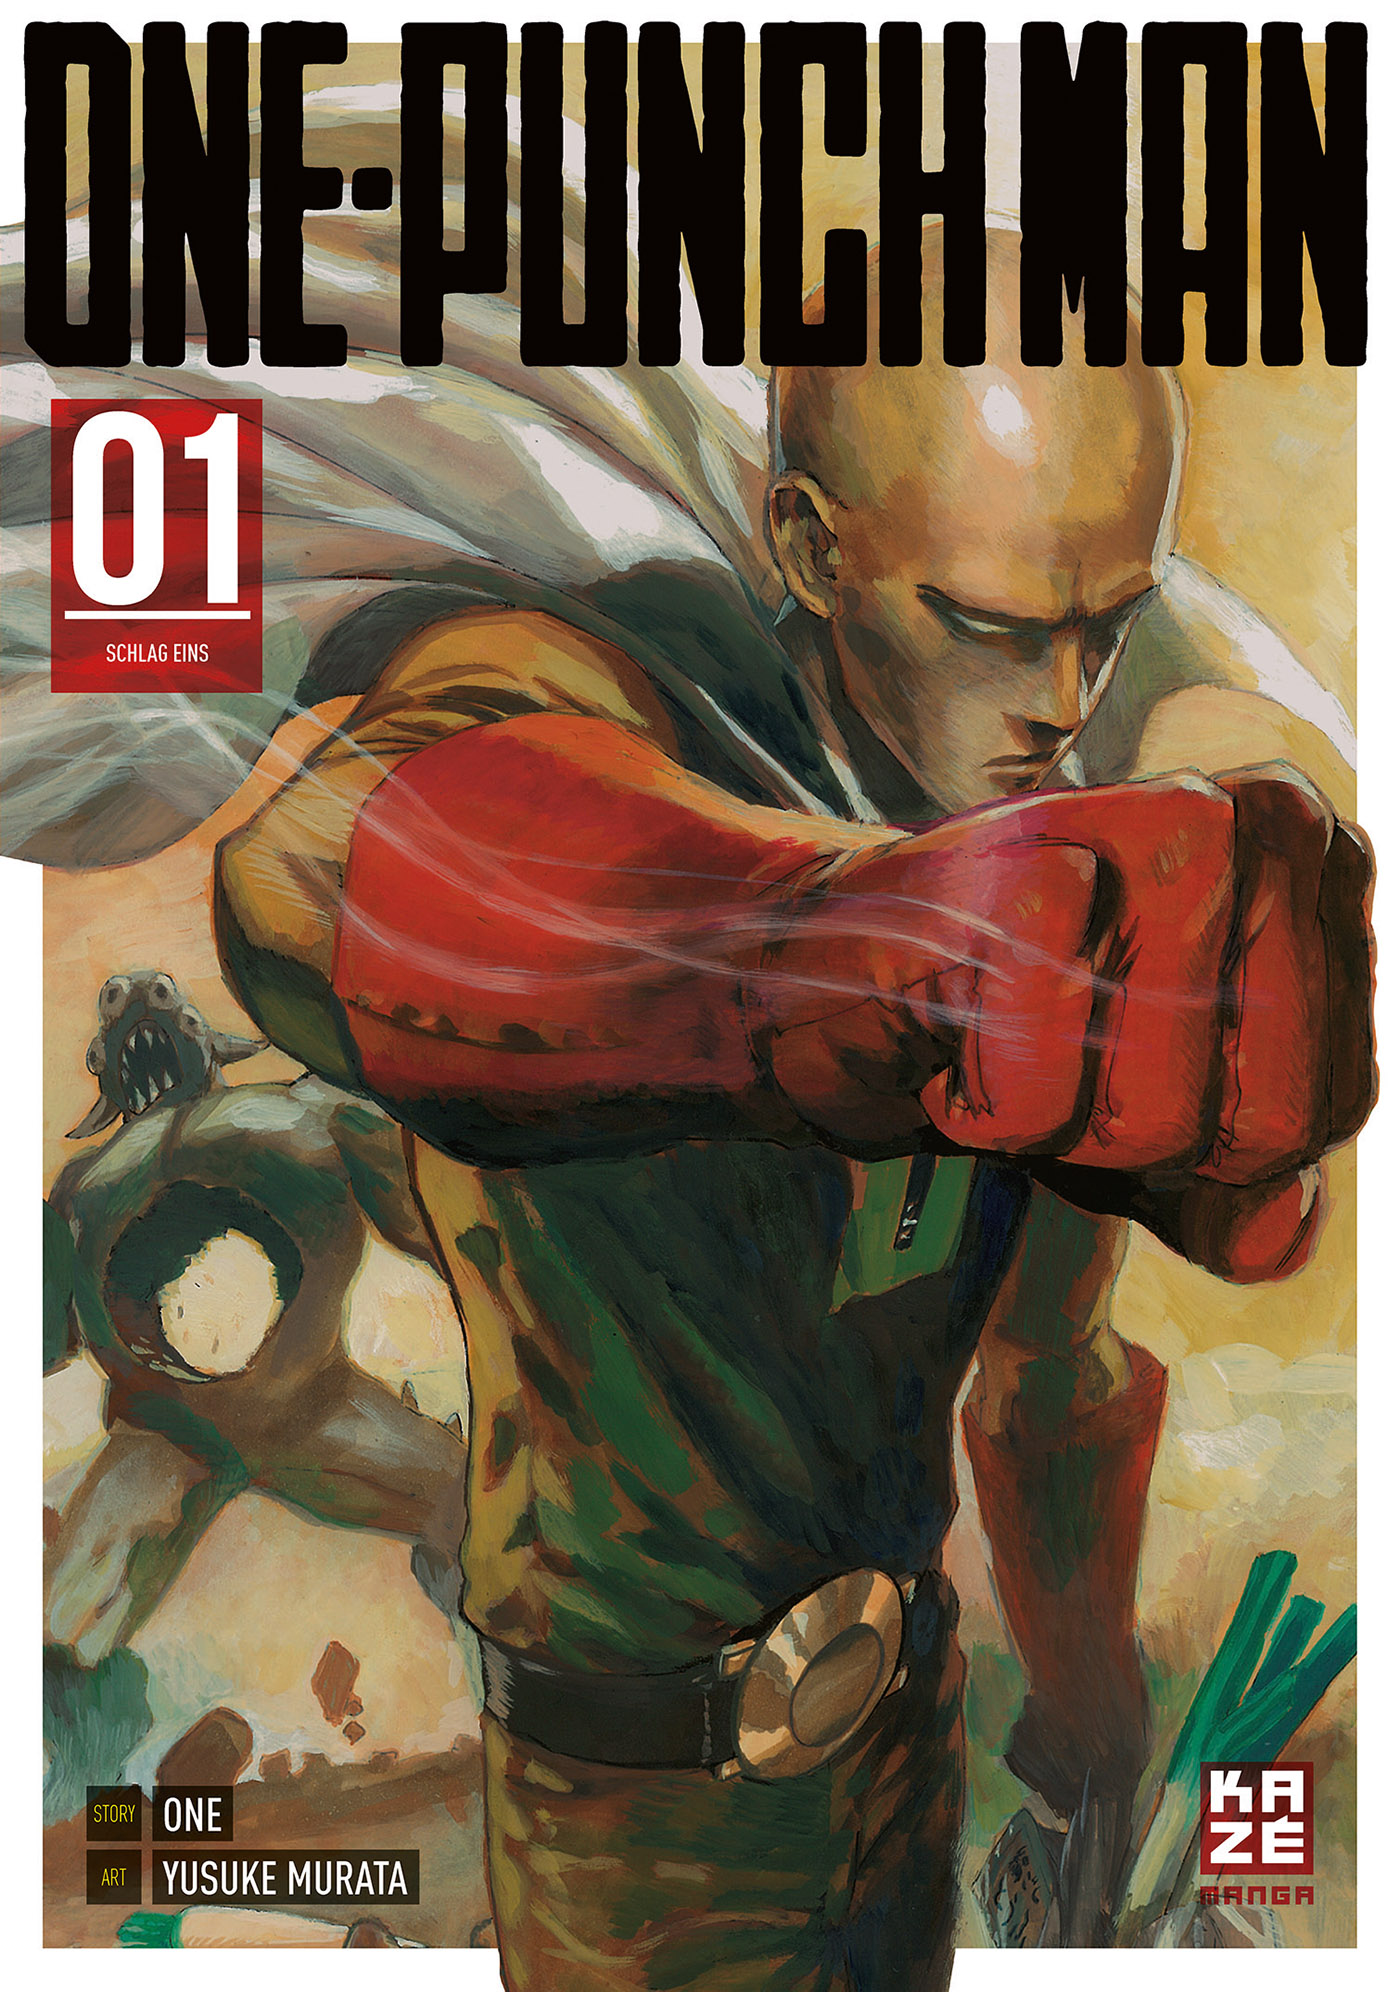 1 - Band Man One-Punch